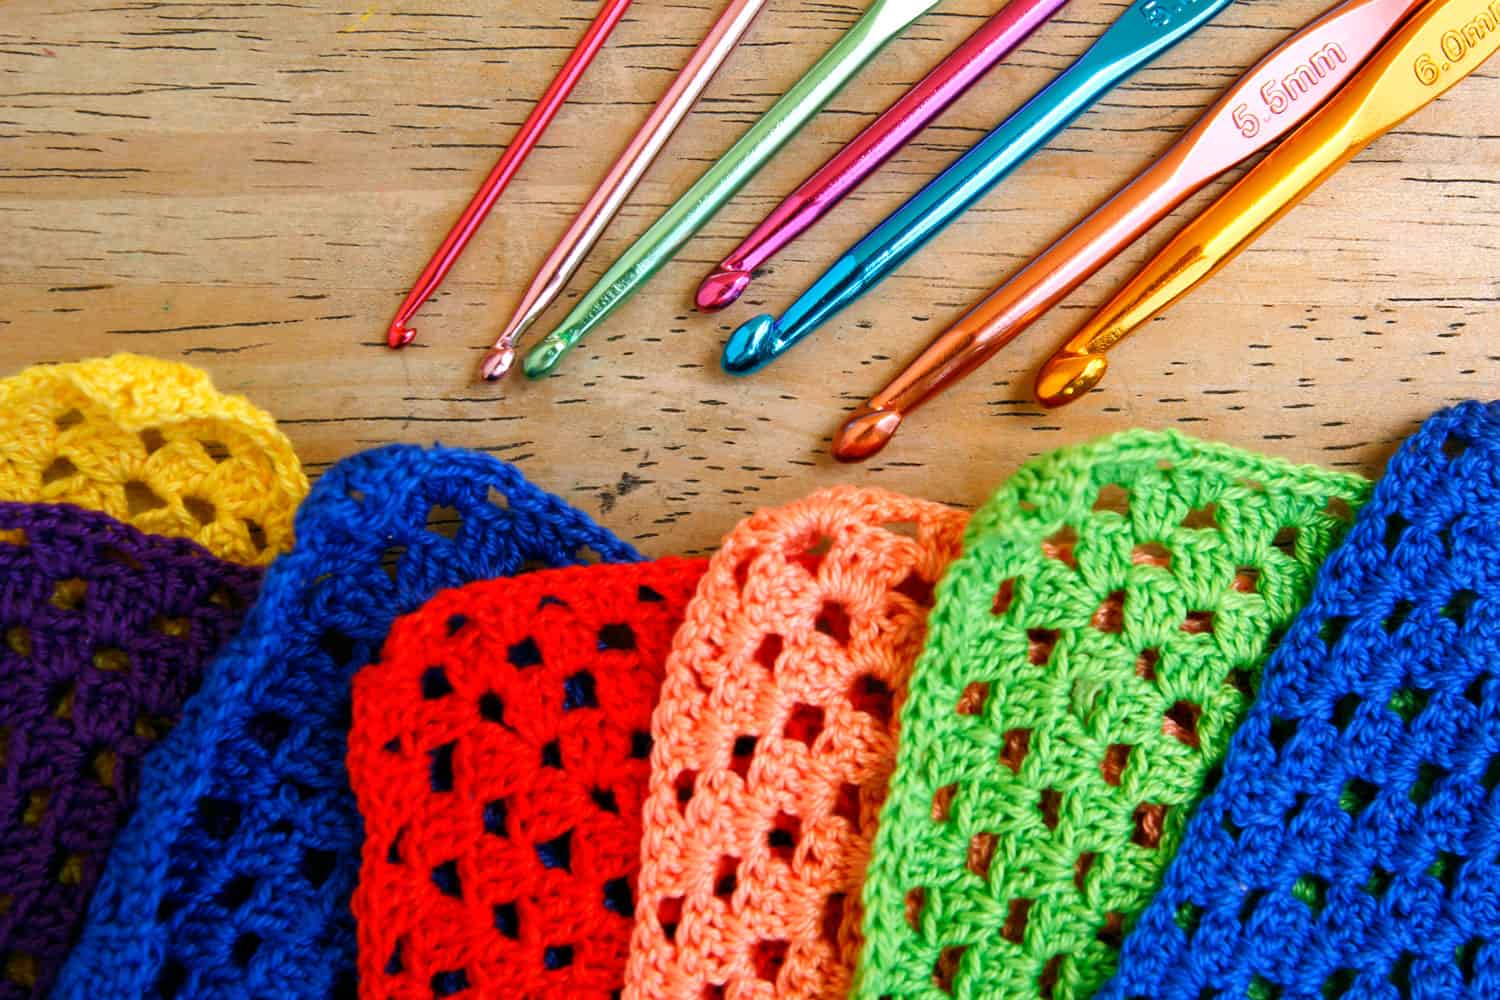 A complete set of crochet needles and small crocheted granny squares